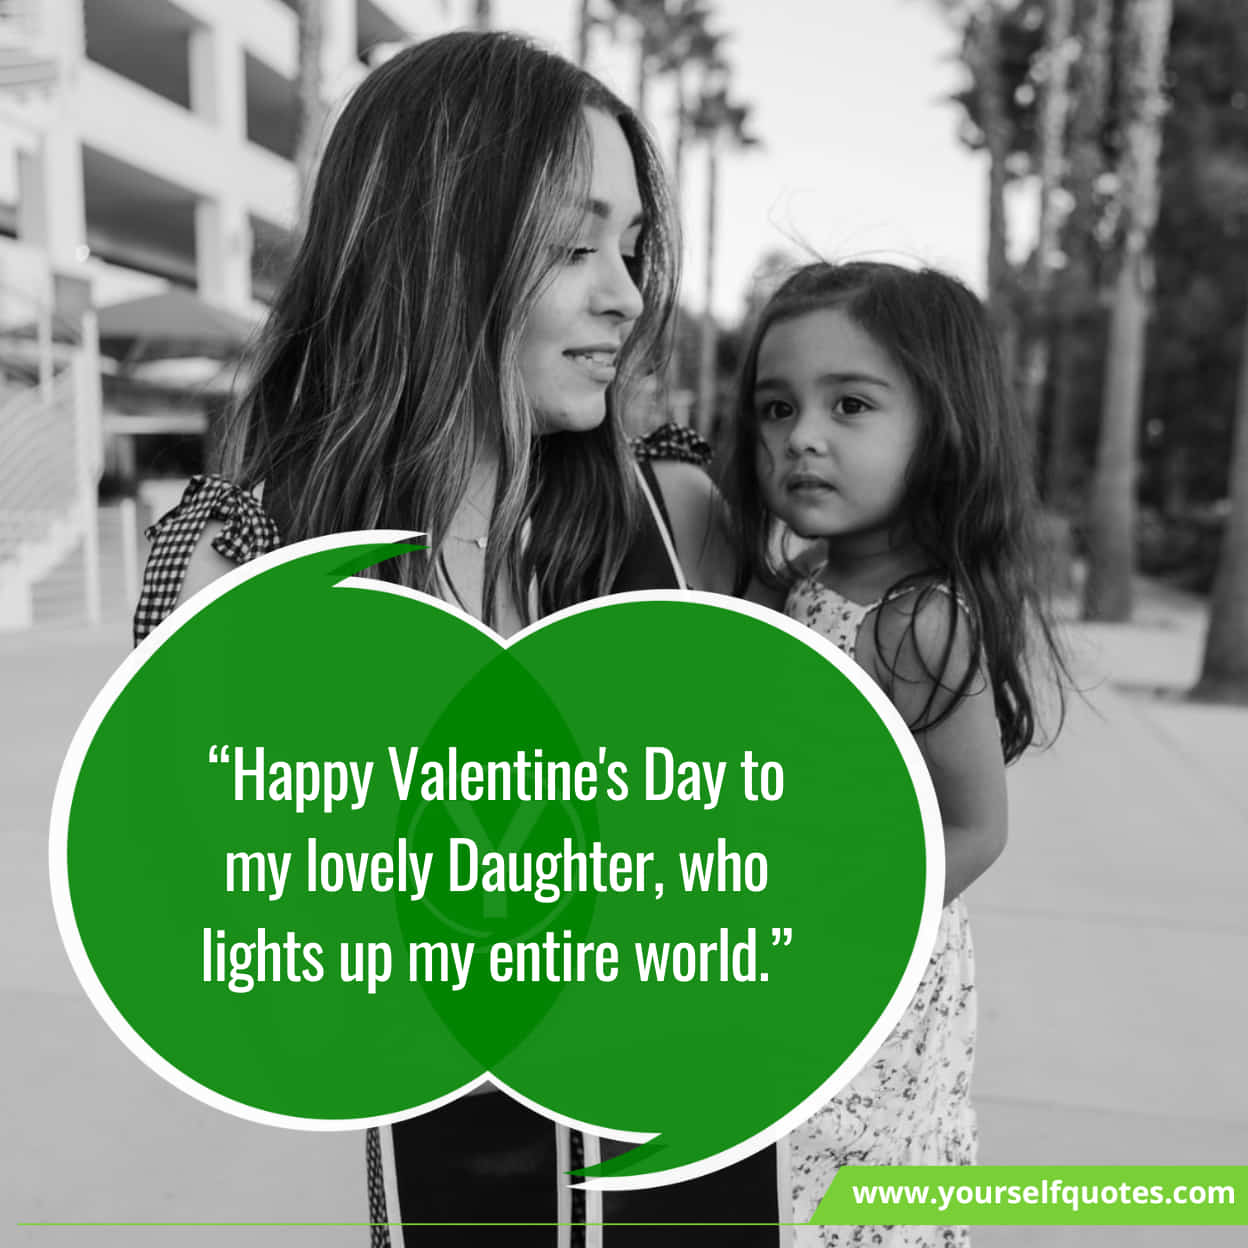 Lovely Valentine's Day Wishes For Daughter